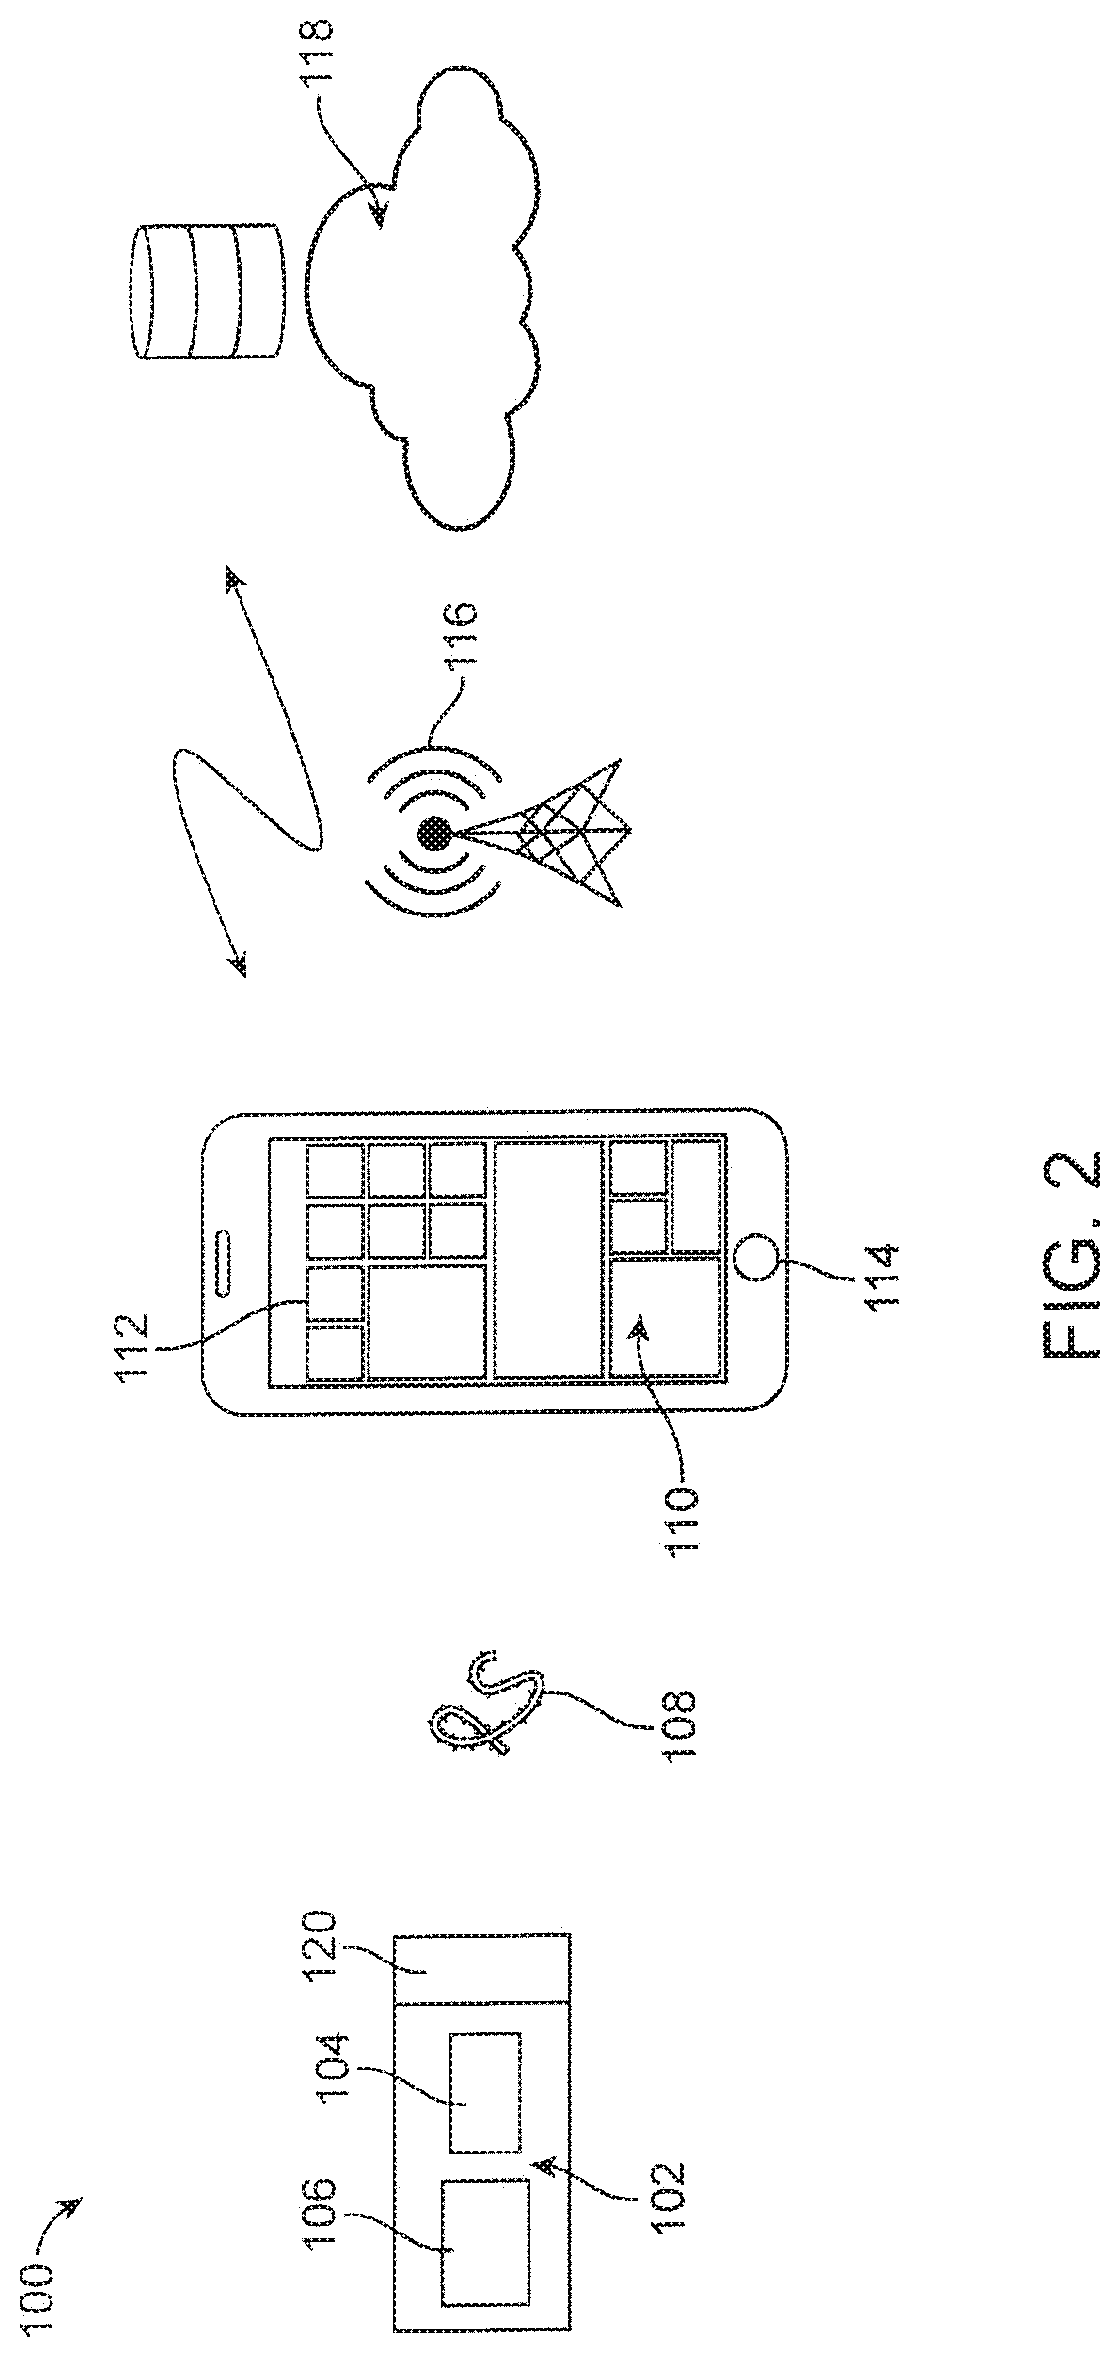 Spectrometry systems, methods, and applications